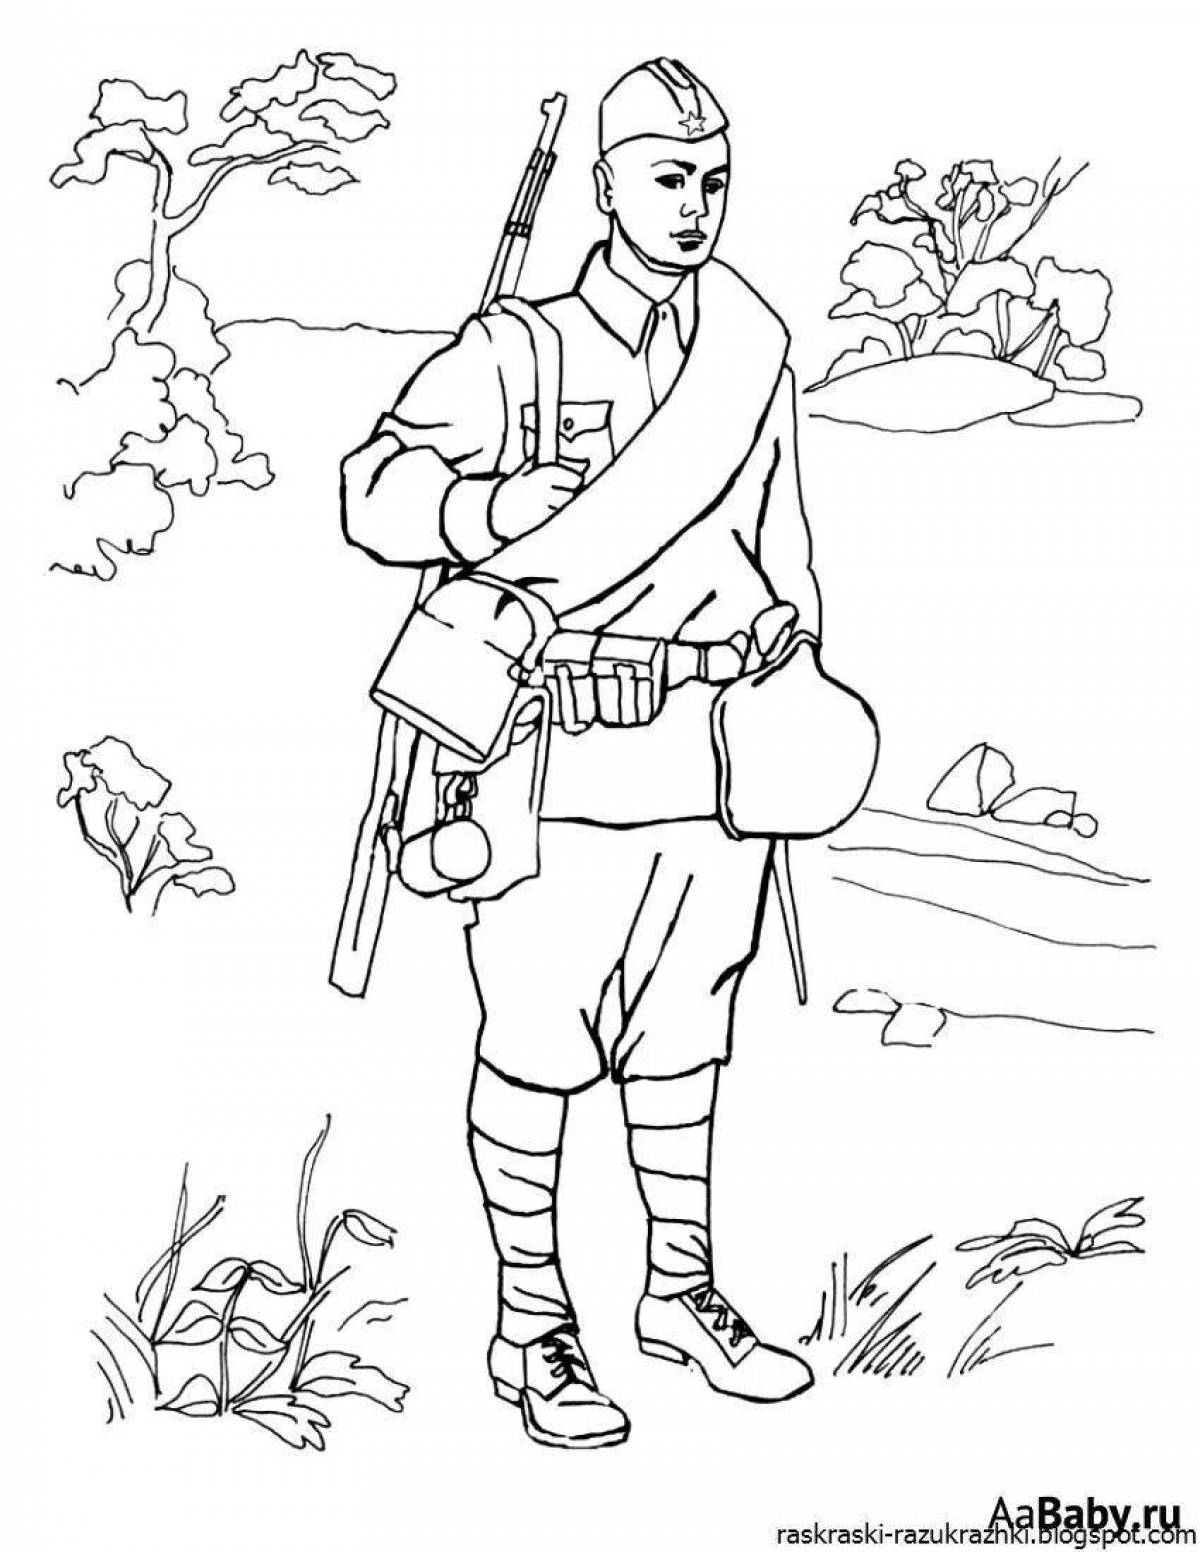 Incredible Russian soldier coloring book for kids